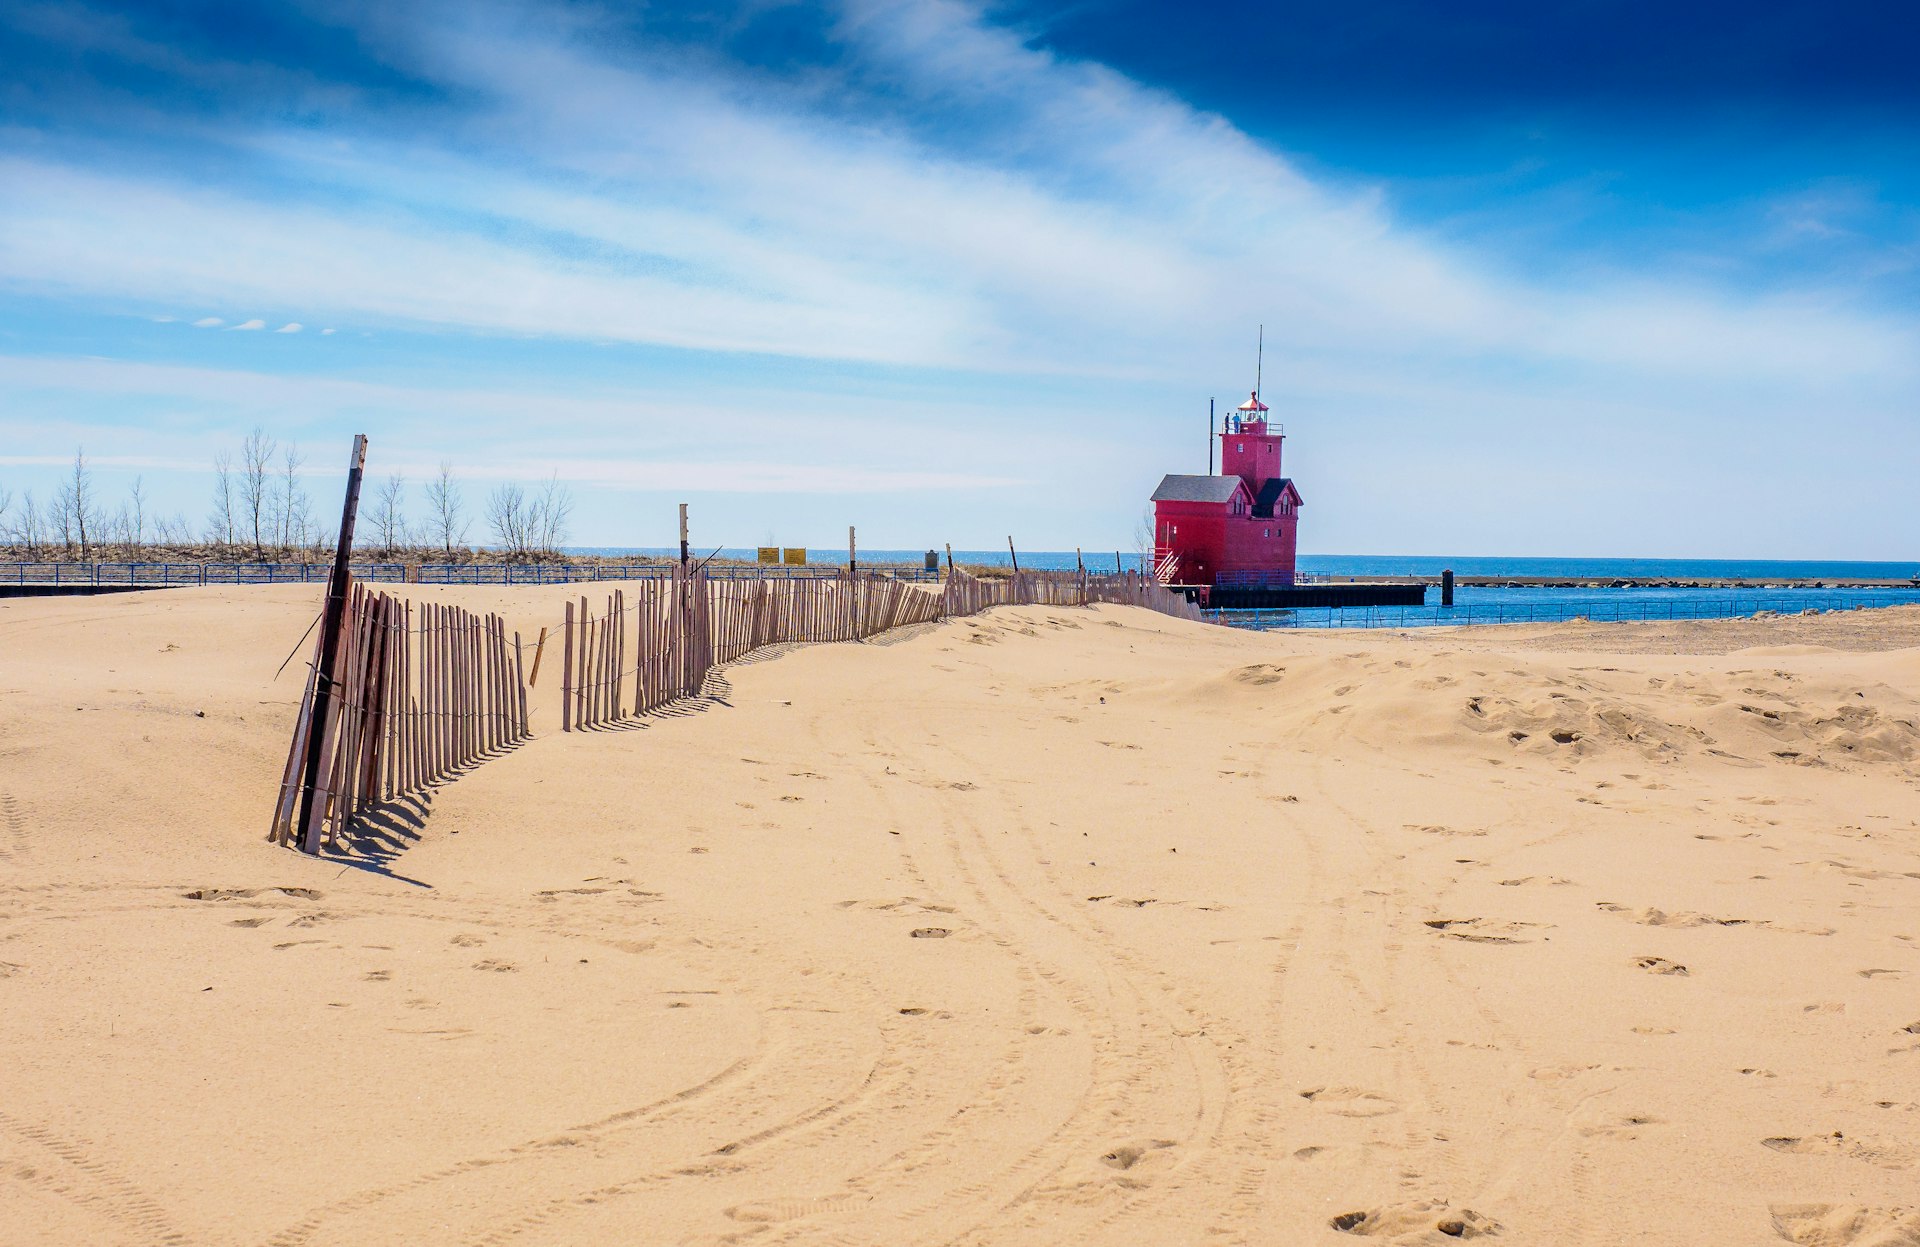 A wide sand beach with a fence and a big red lighthouse in the distance